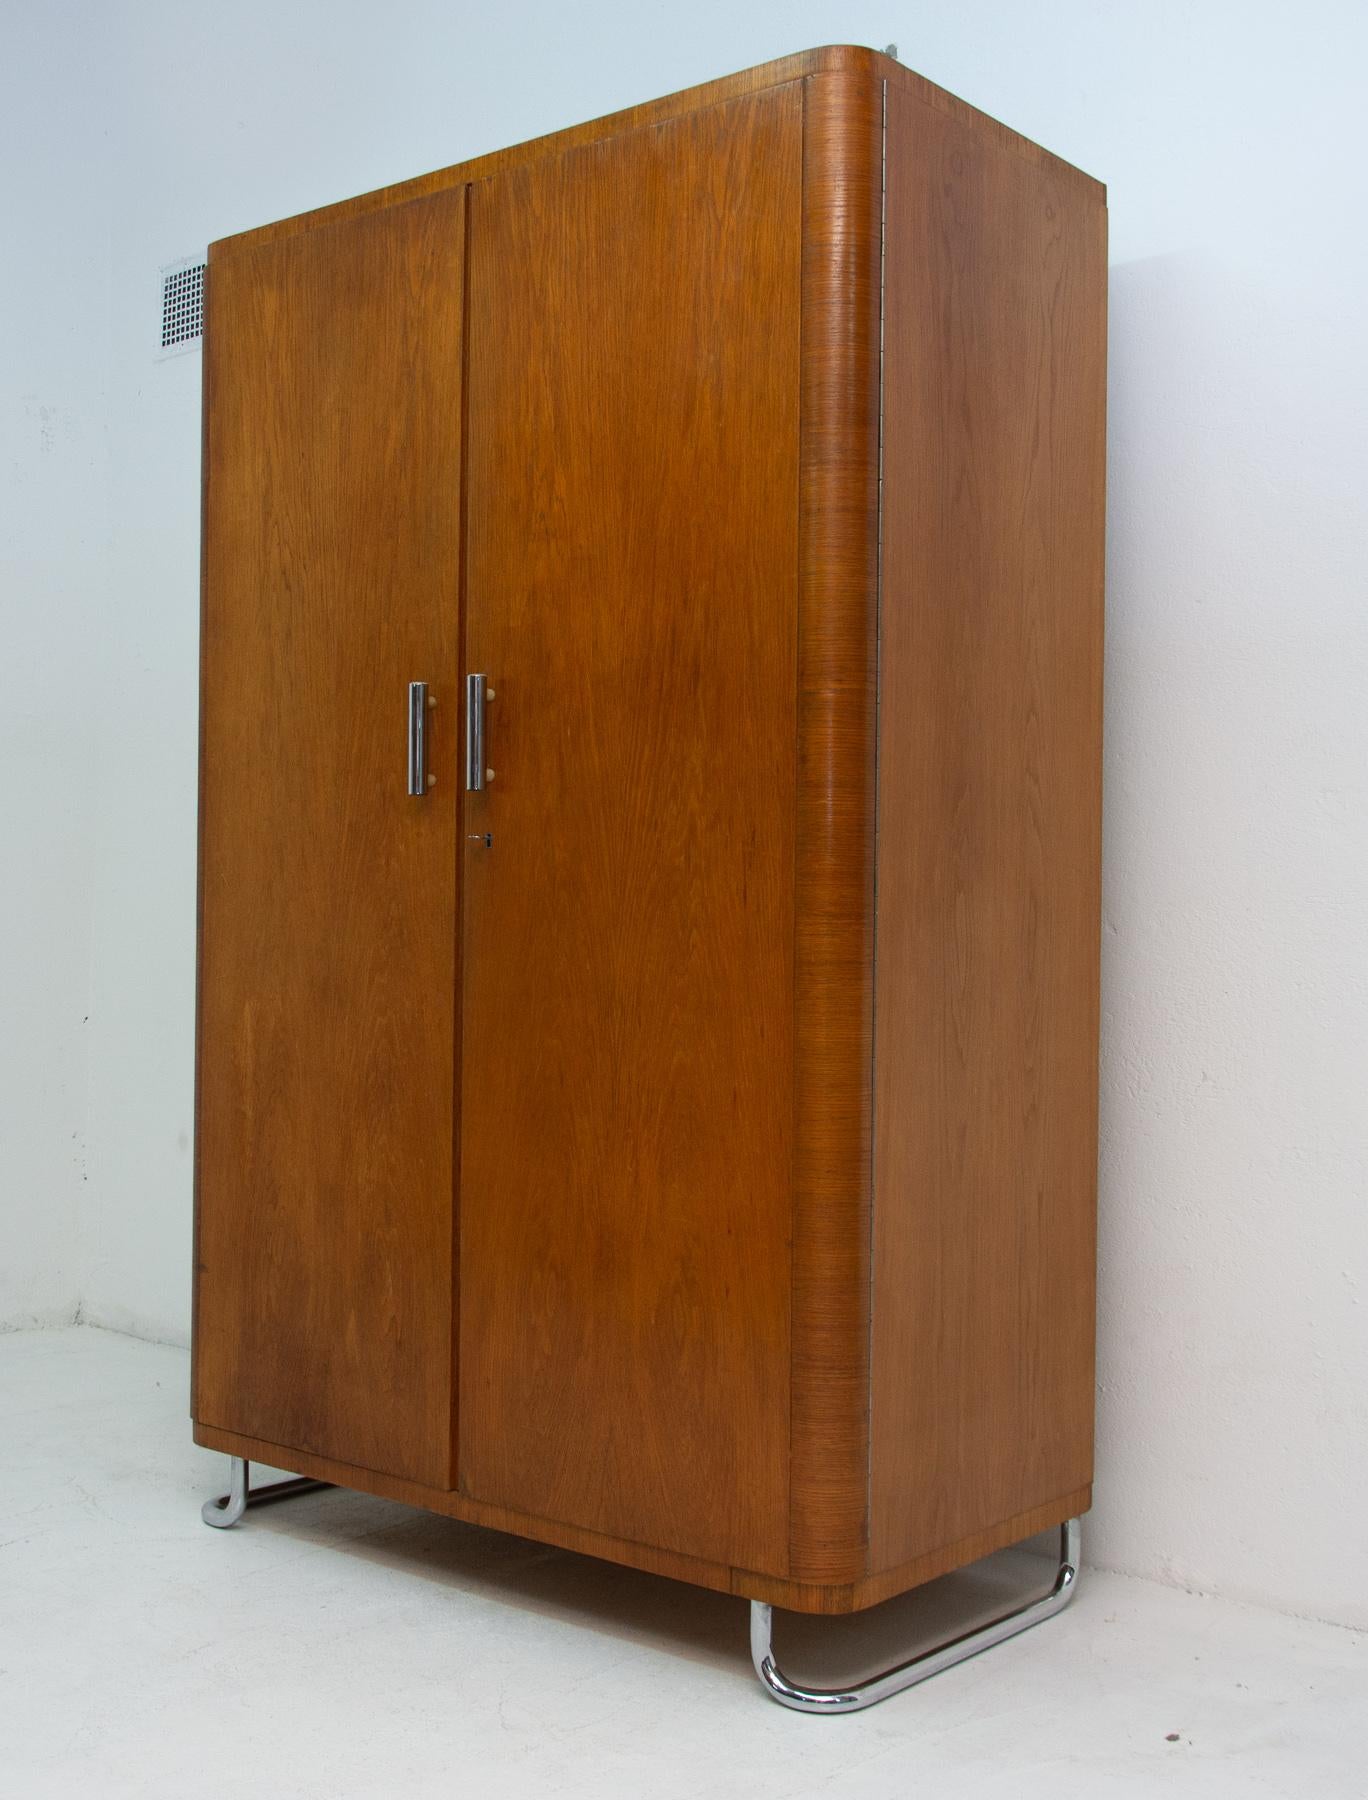 Wardrobe with chrome elements from the Bauhaus period. It made in the former Czechoslovakia. Designed by Vichr & spol in the 1930s and made by Kovona company in the 1950´s.
This is a typical example of residential furniture from the Bauhaus period